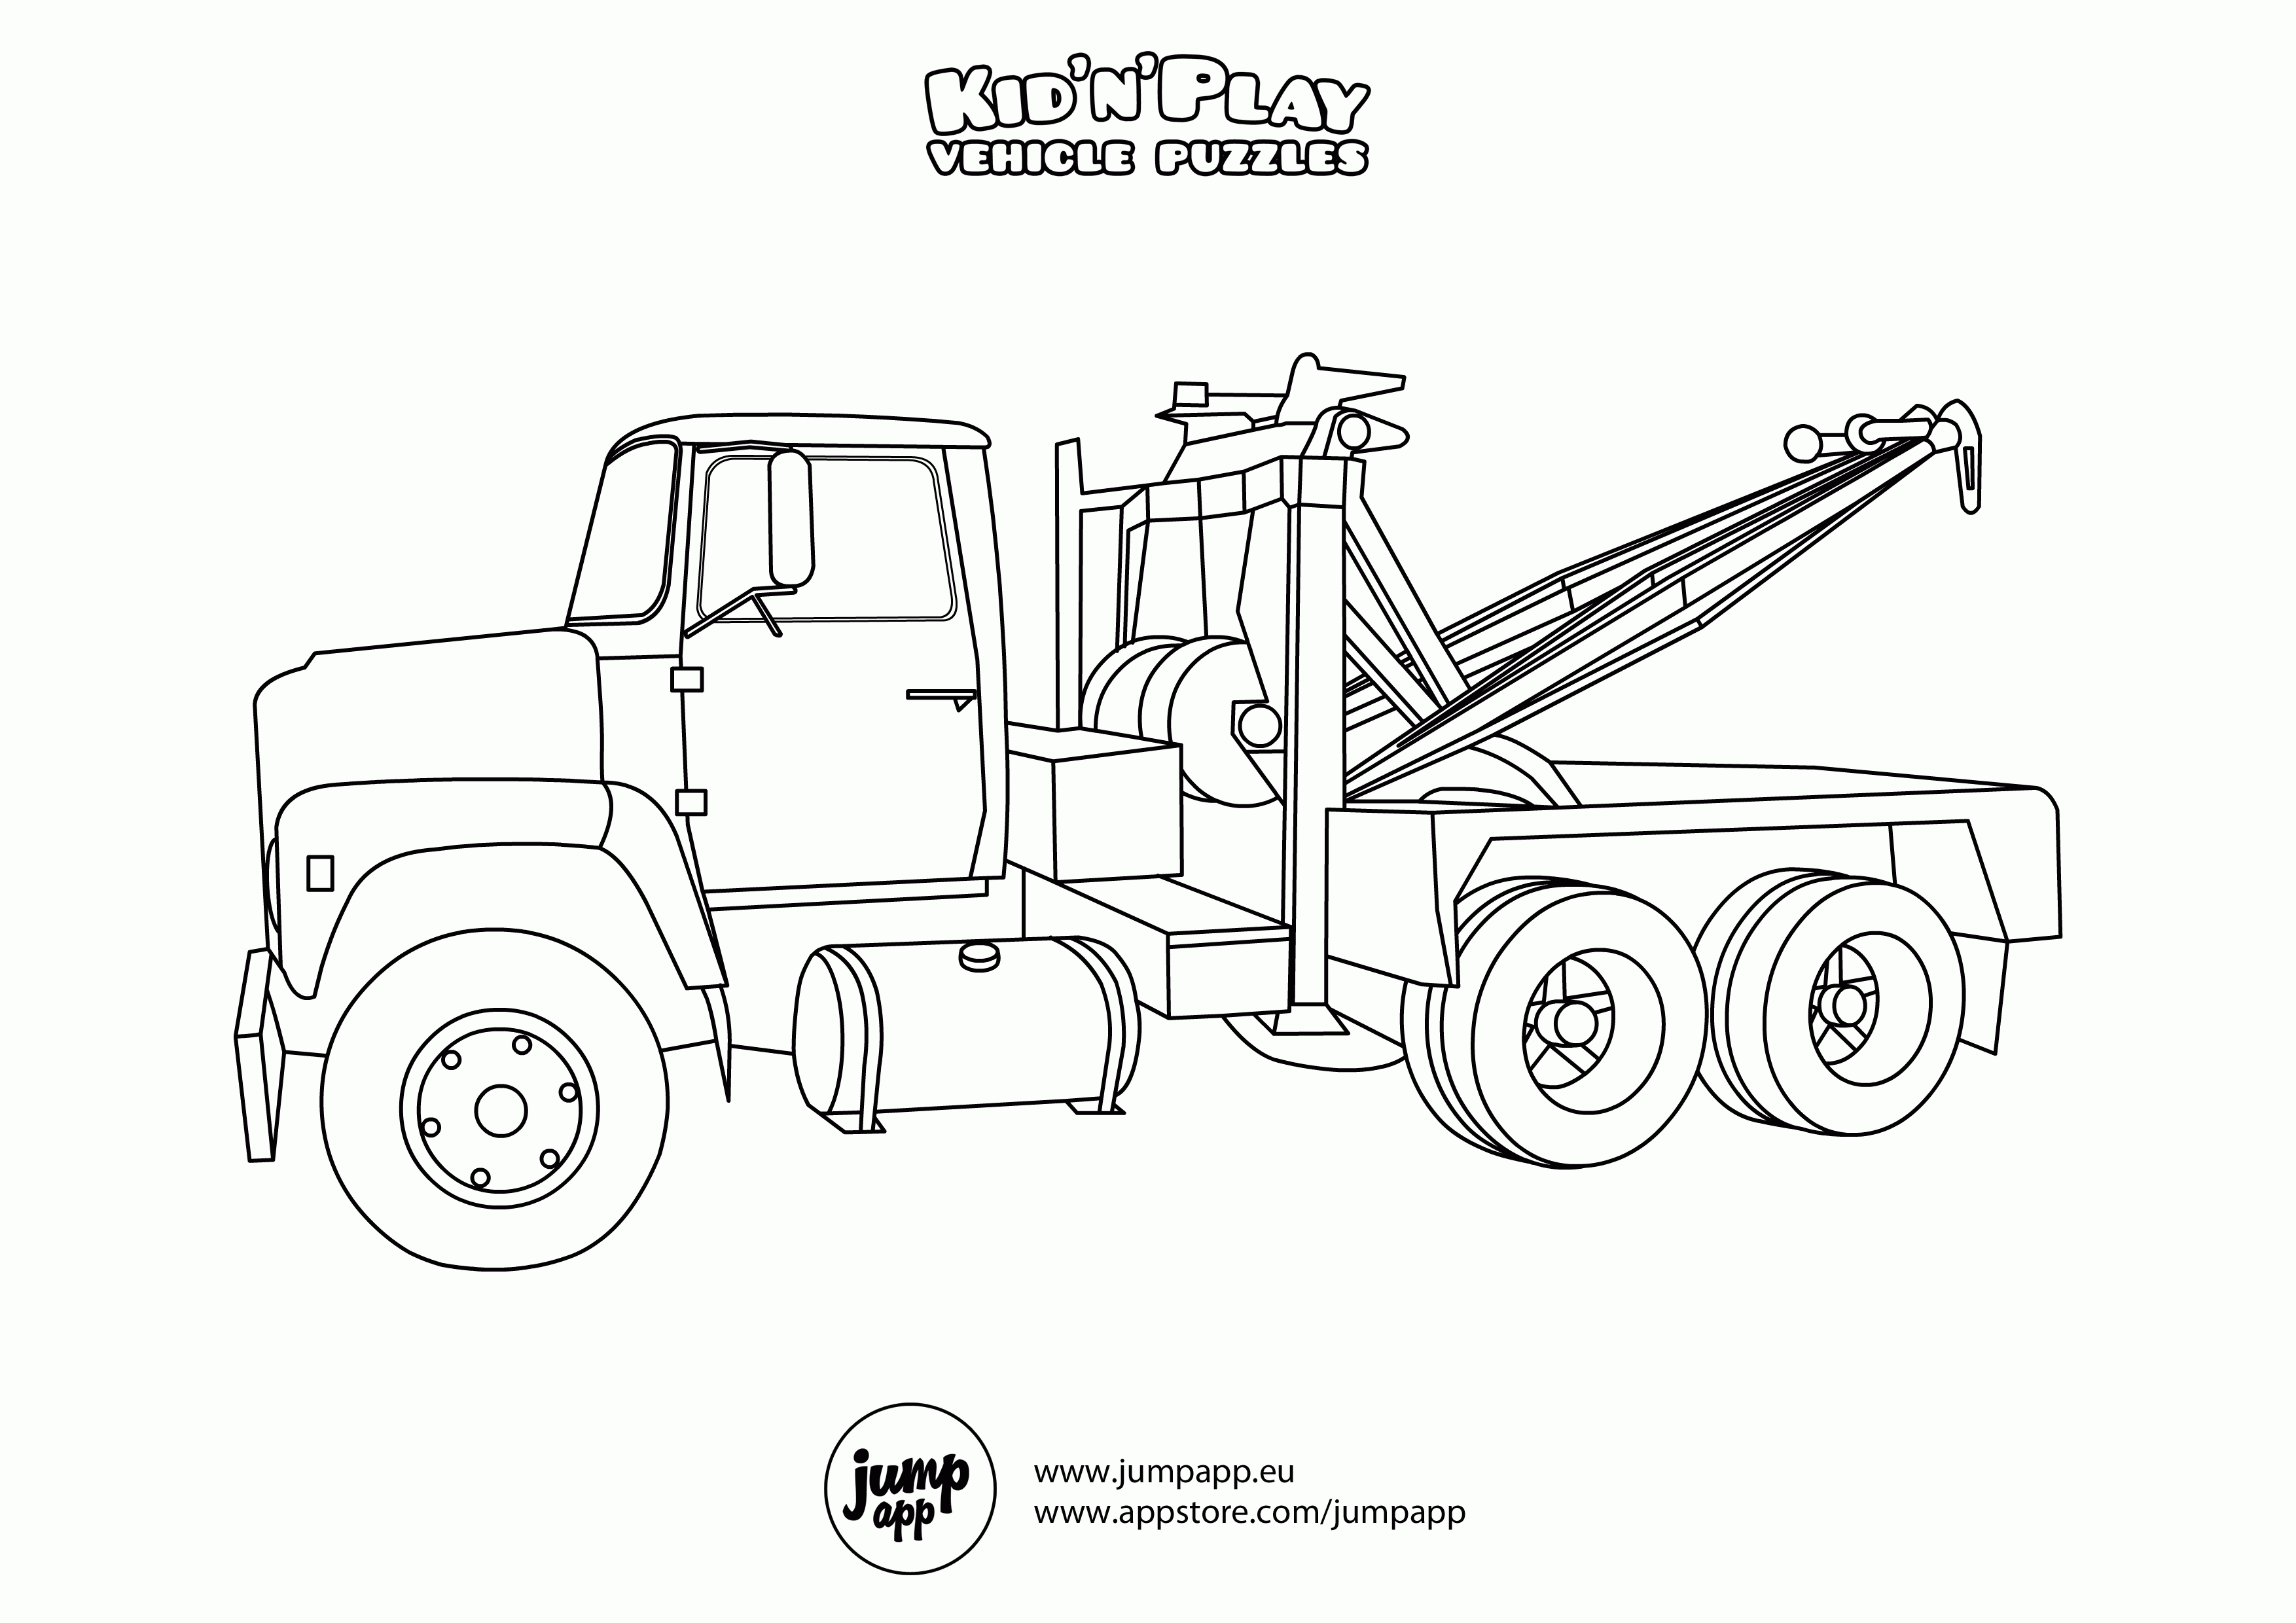 tow truck coloring pages tow truck coloring pages at getcoloringscom free tow pages truck coloring 